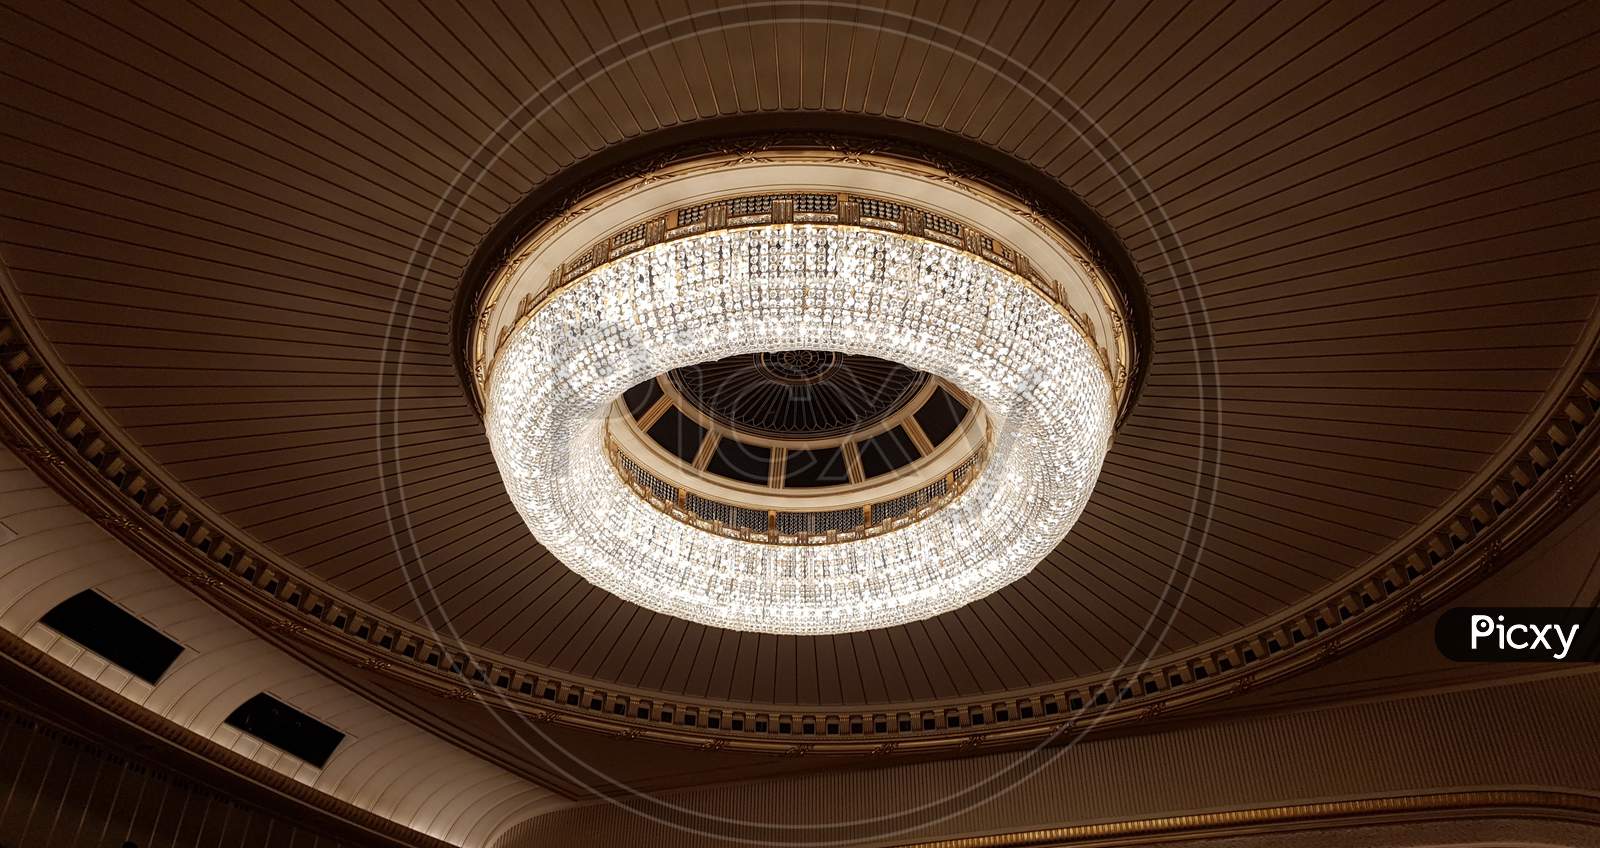 A Huge Chandelier Hangs From The Ceiling. Decorated With Glass For Greater Light Output.